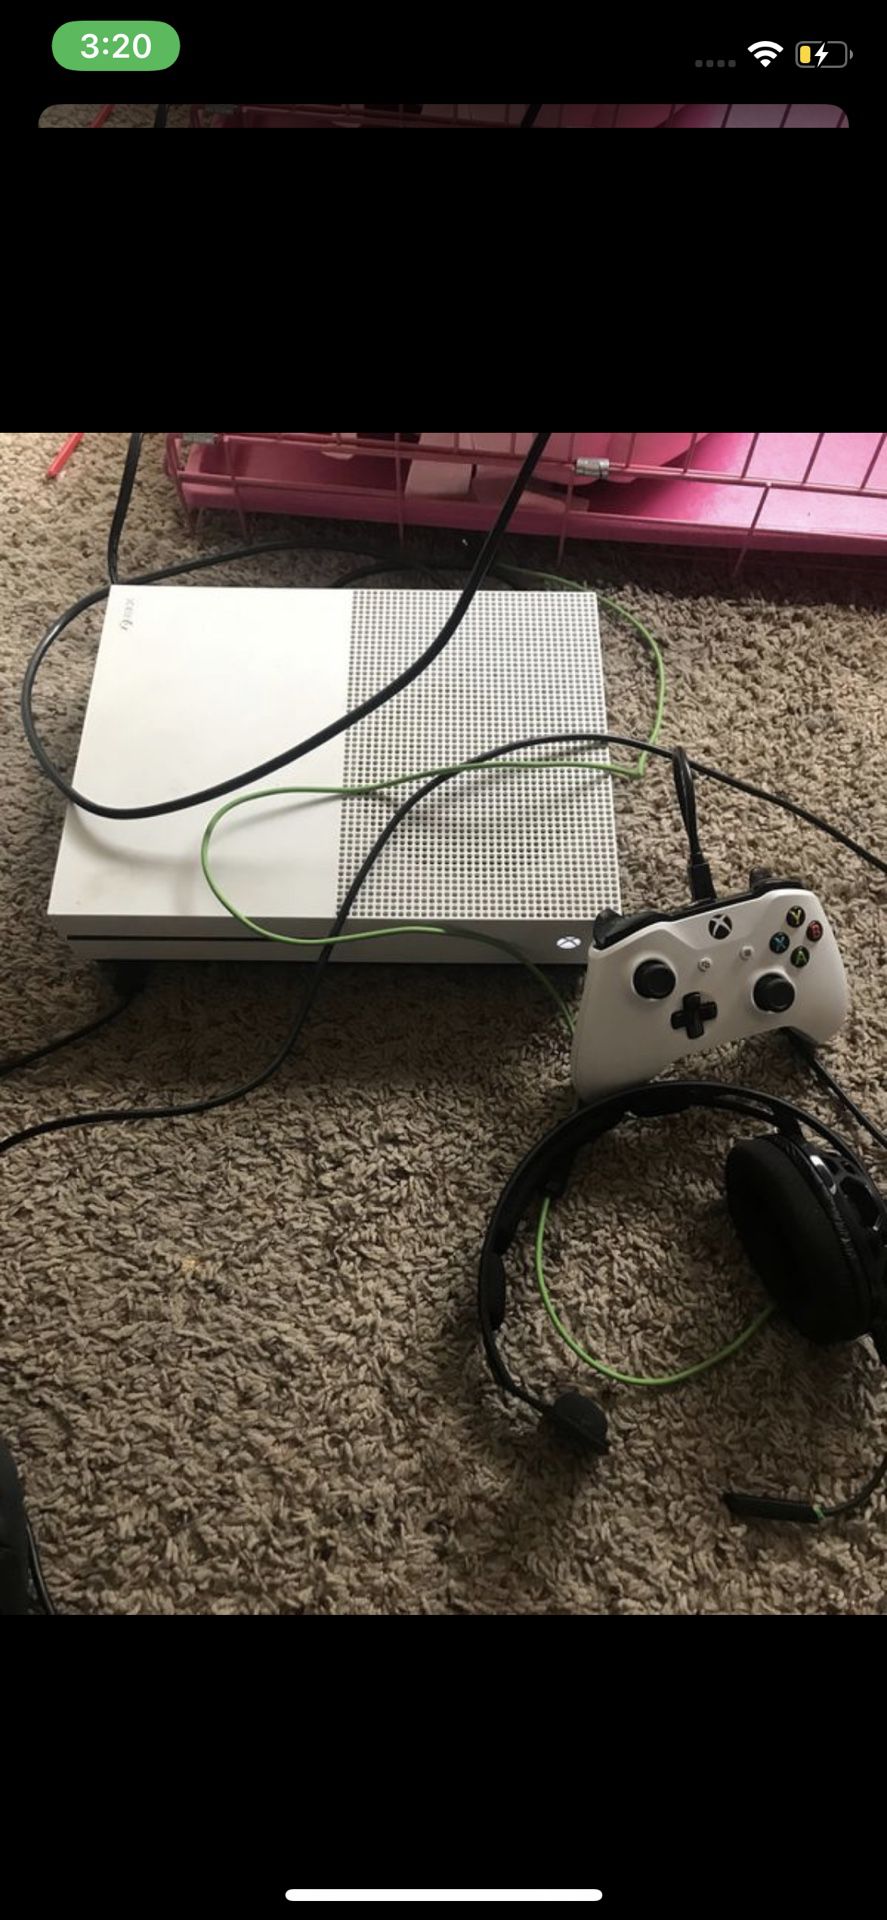 Xbox one S one controller 1 headset Xbox comes with 173 games